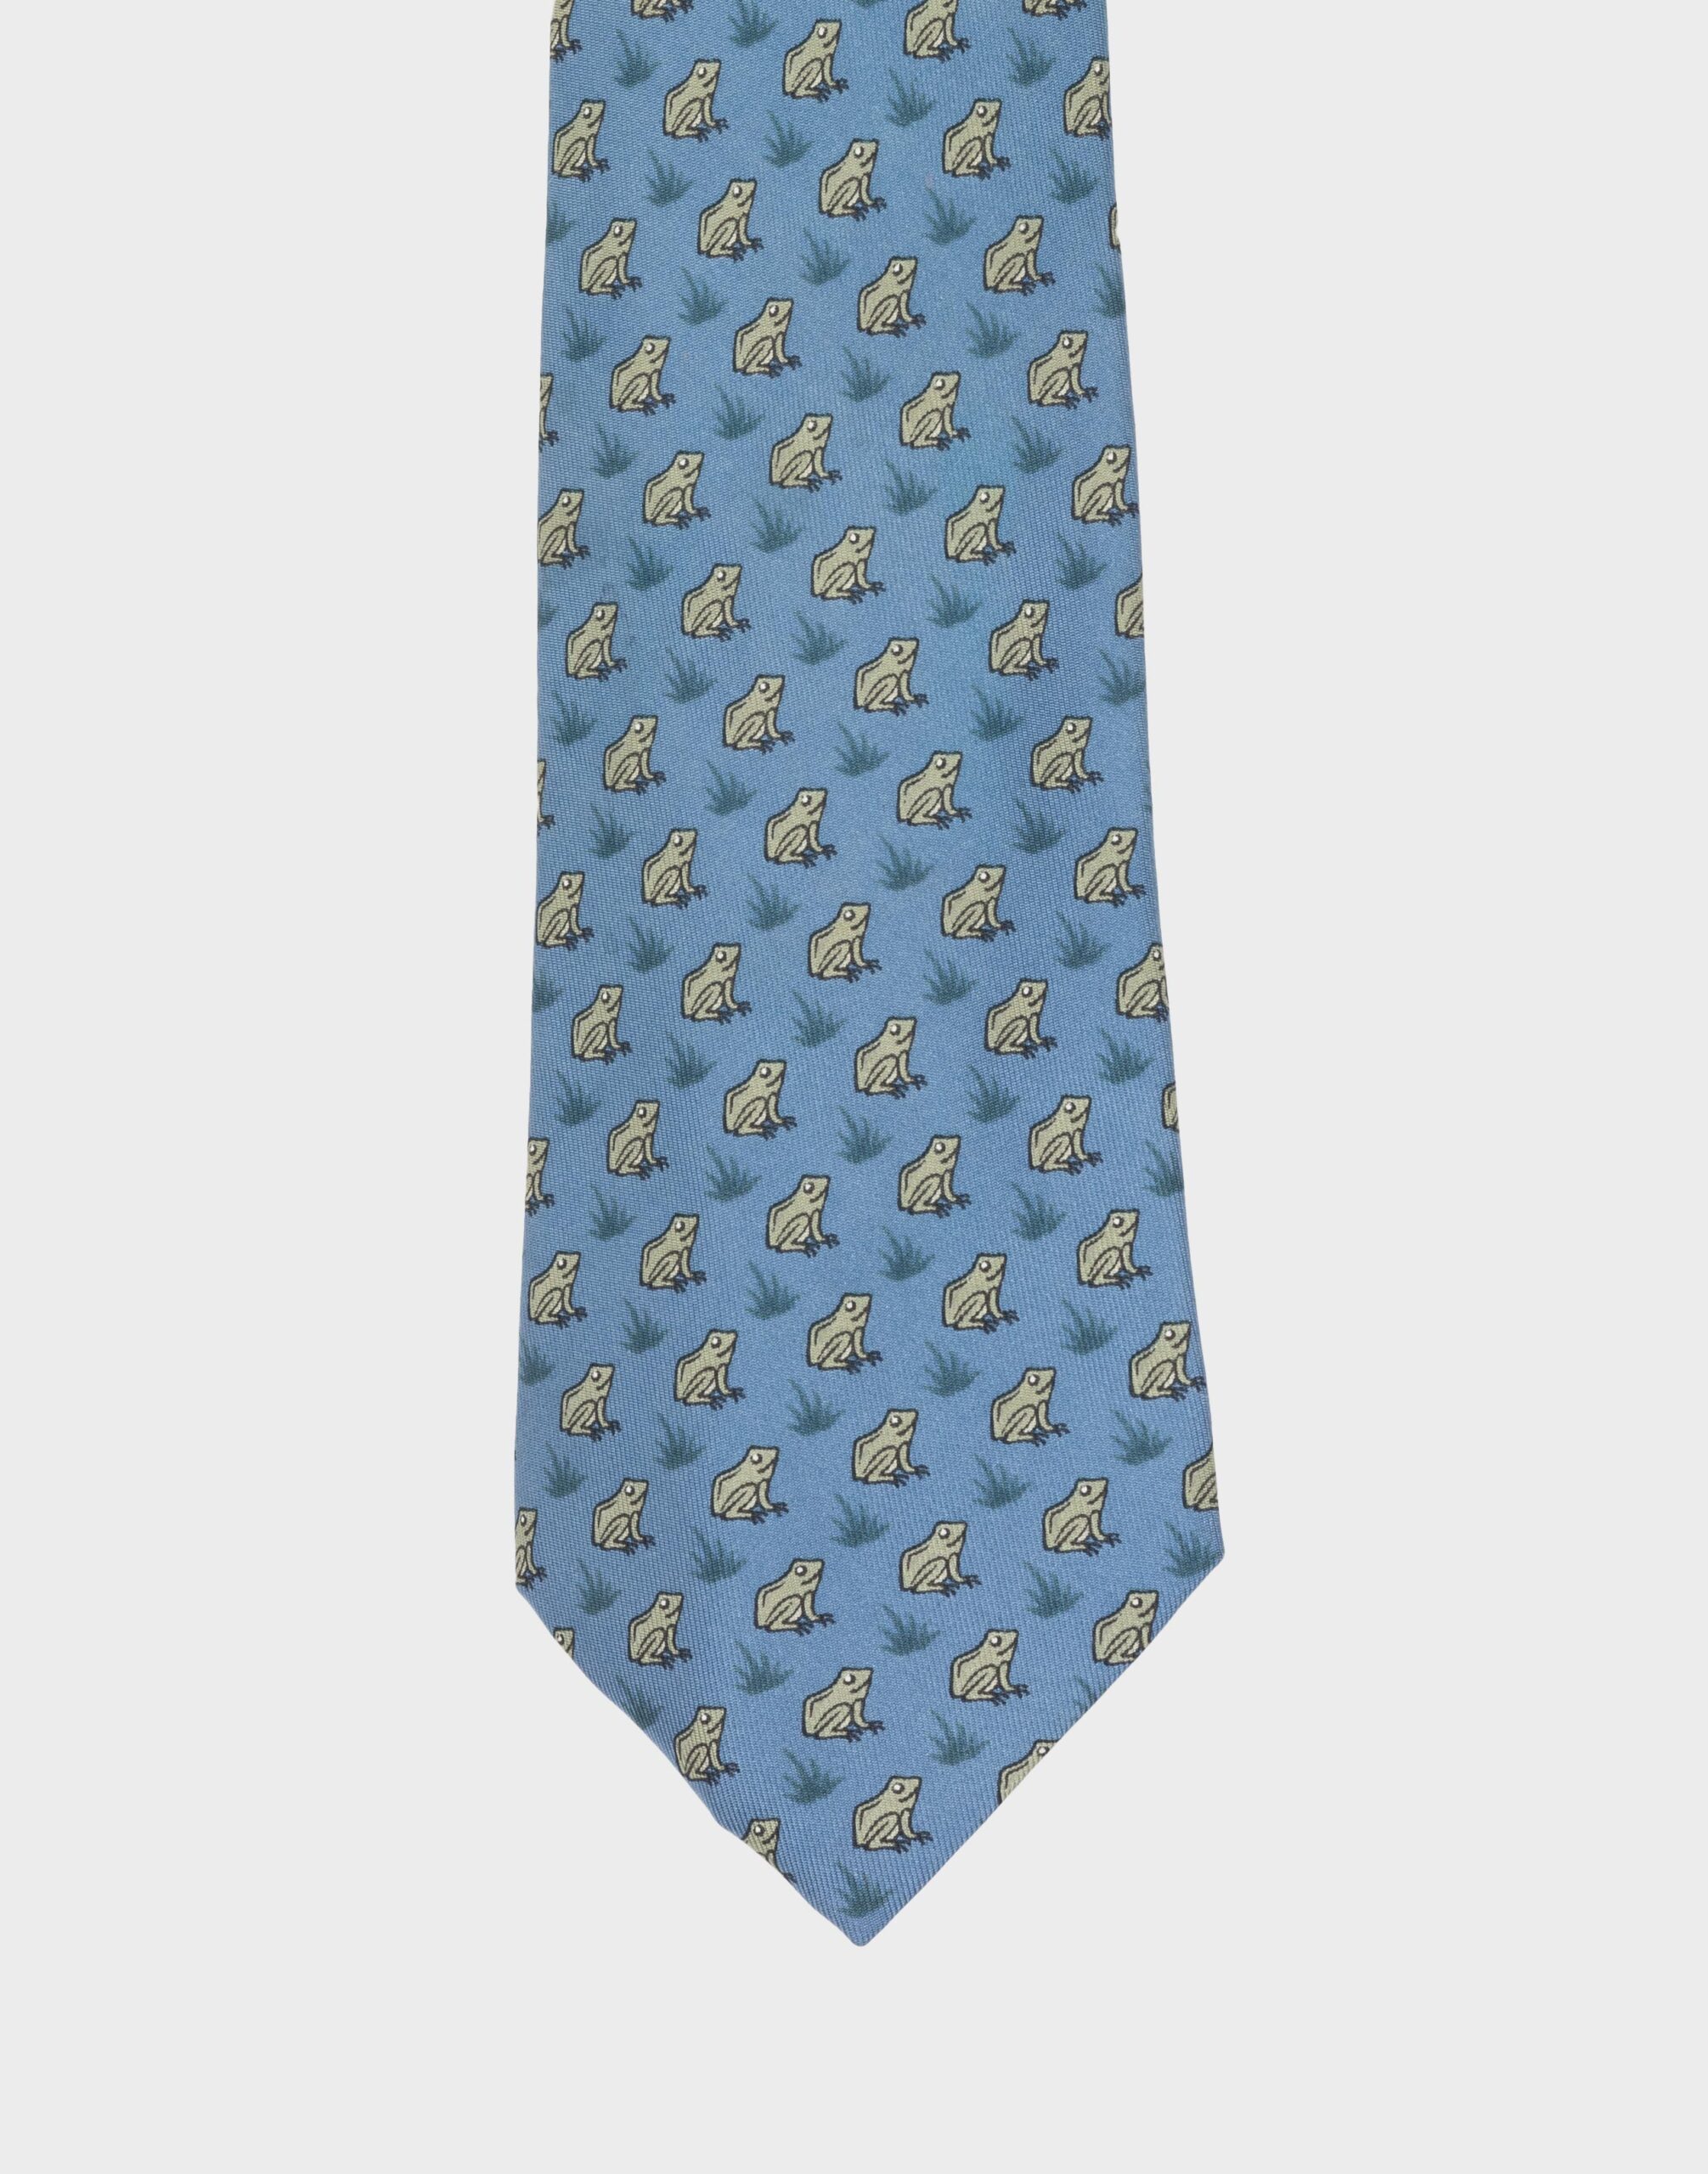 Light blue men's tie with a frog pattern